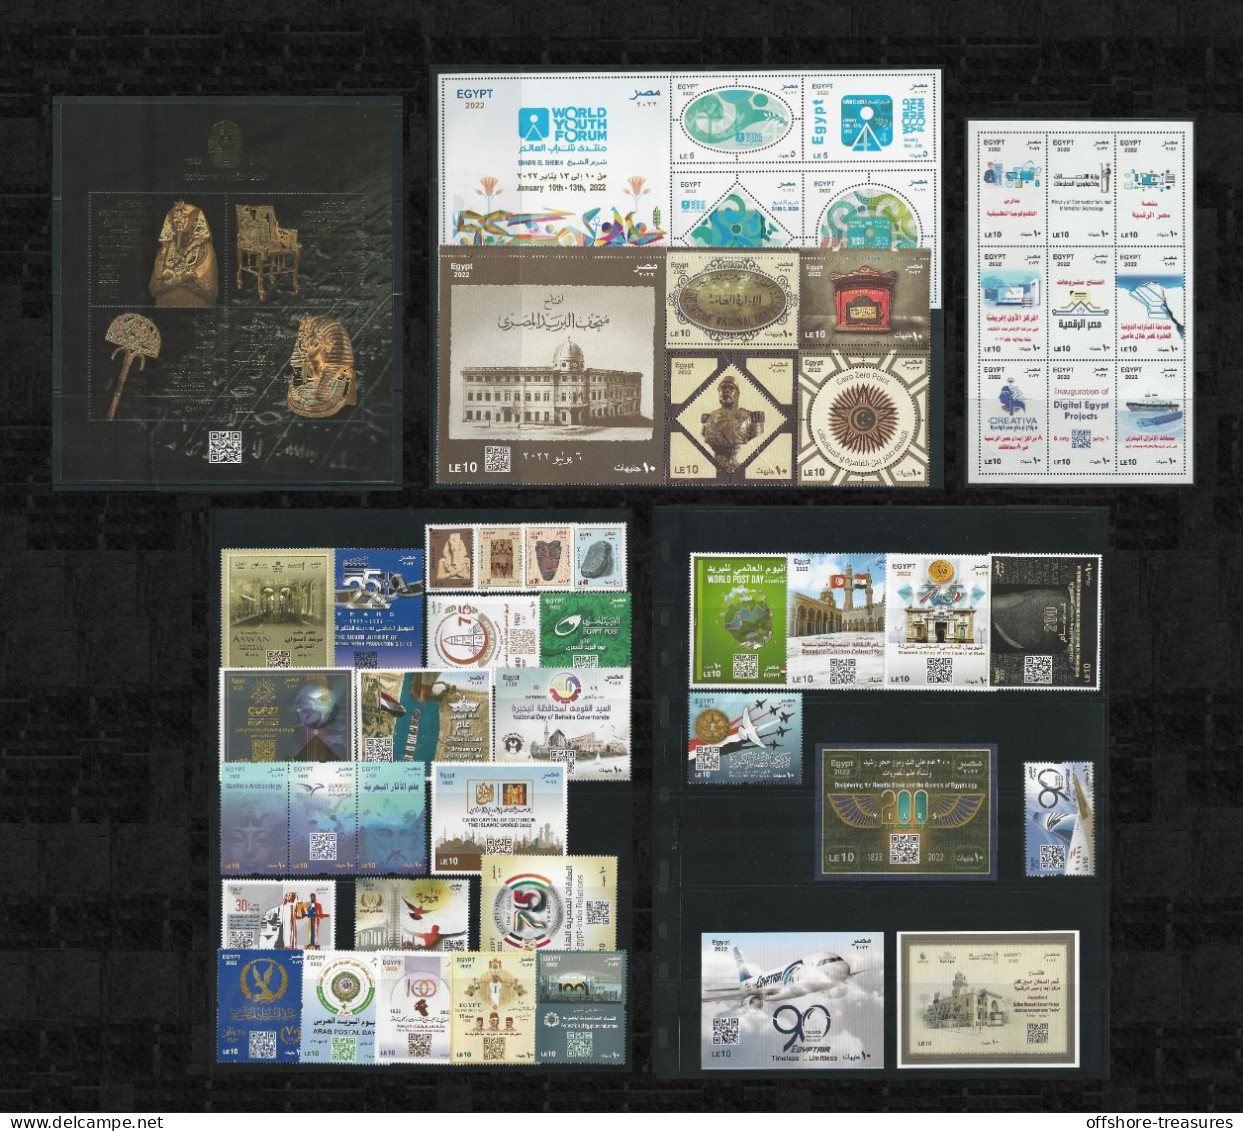 Egypt EGYPTE 2022 ONE YEAR Full Set Stamps 51 Pieces, ALL Commemorative Stamp & Definitive & Souvenir Sheet Issued - Ongebruikt